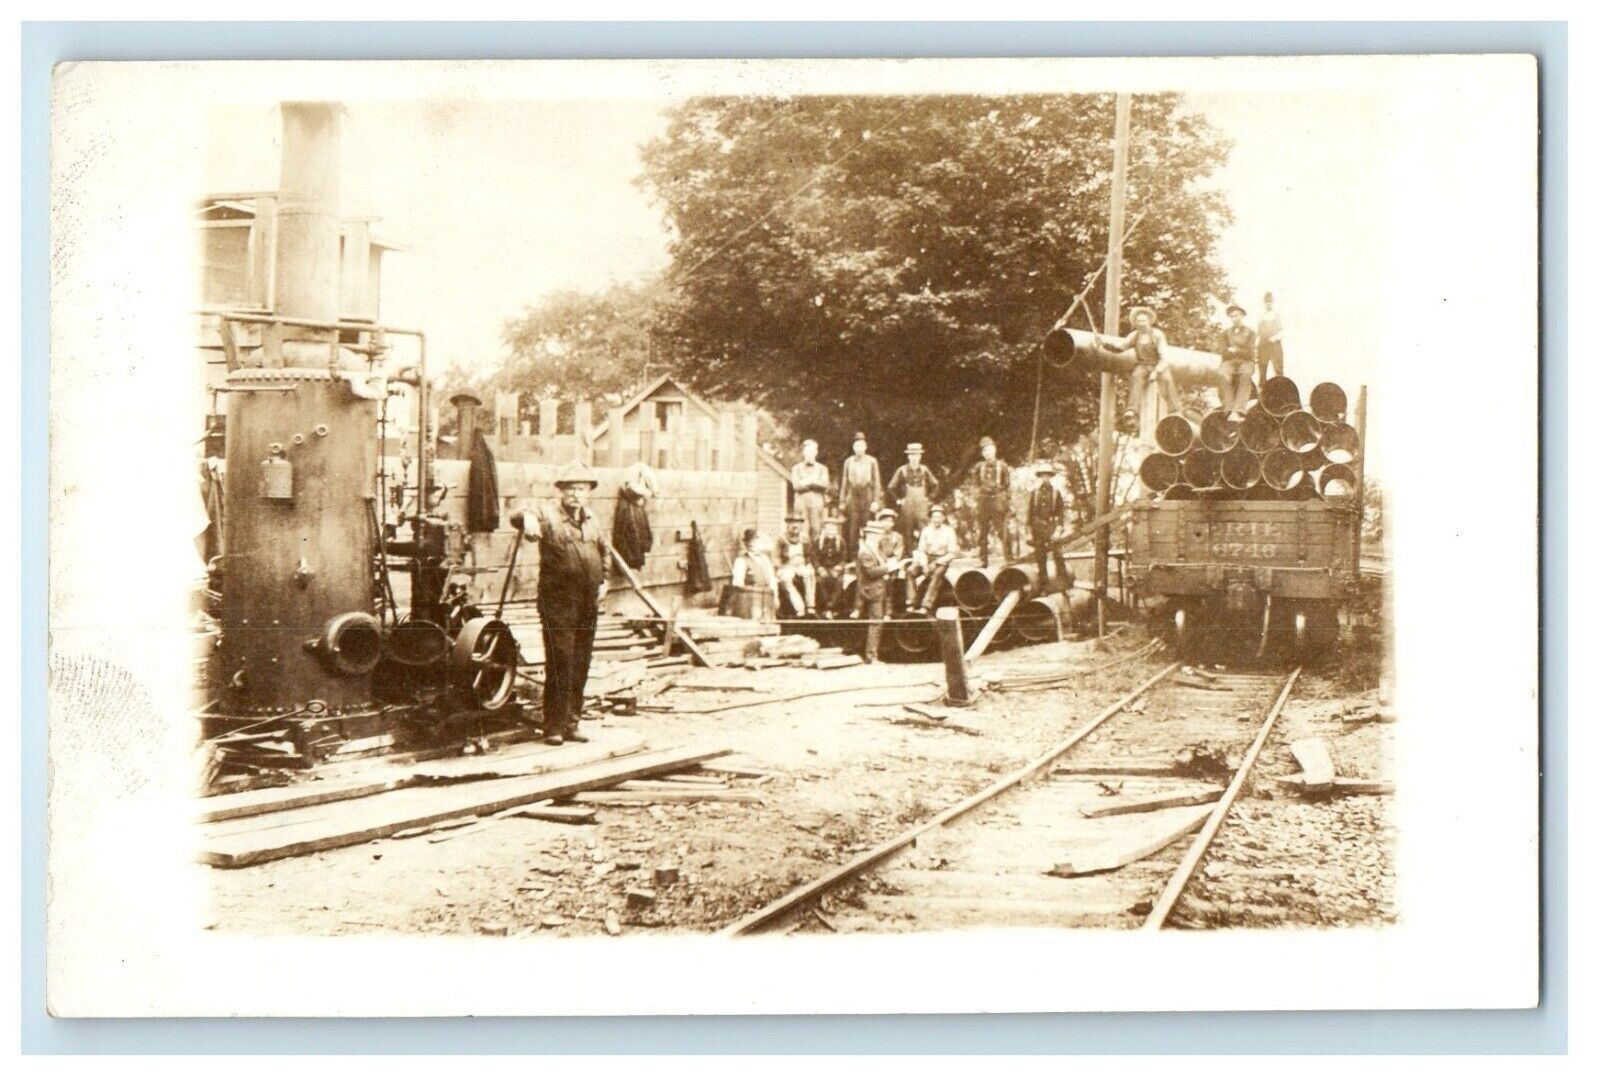 Lawton Station NY, Pipe Construction Workers Occupational RPPC Photo Postcard